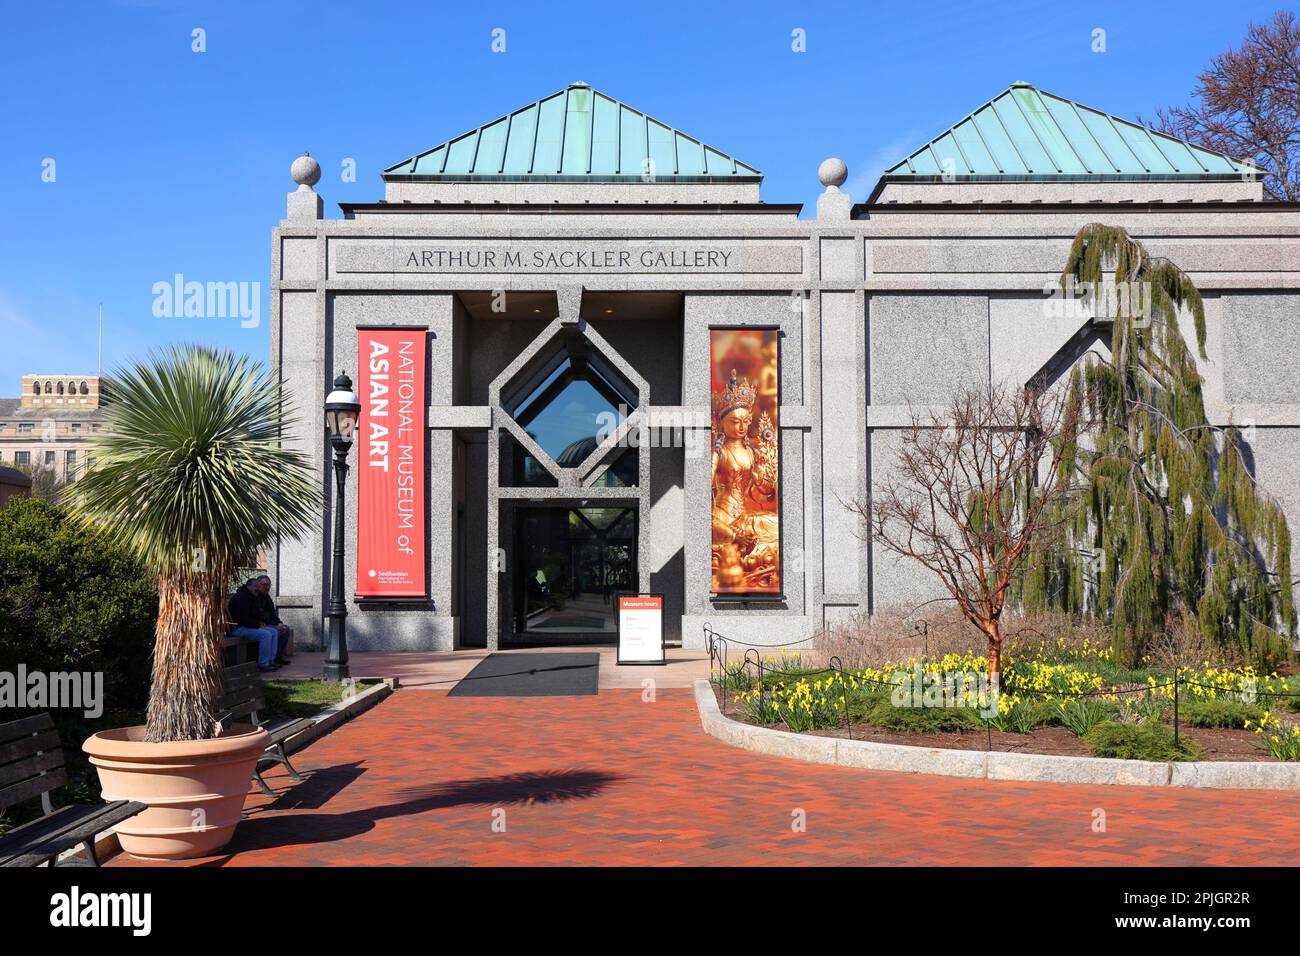 The Arthur M. Sackler Gallery of the Smithsonian National Museum of Asian Art, Washington DC Stock Photo